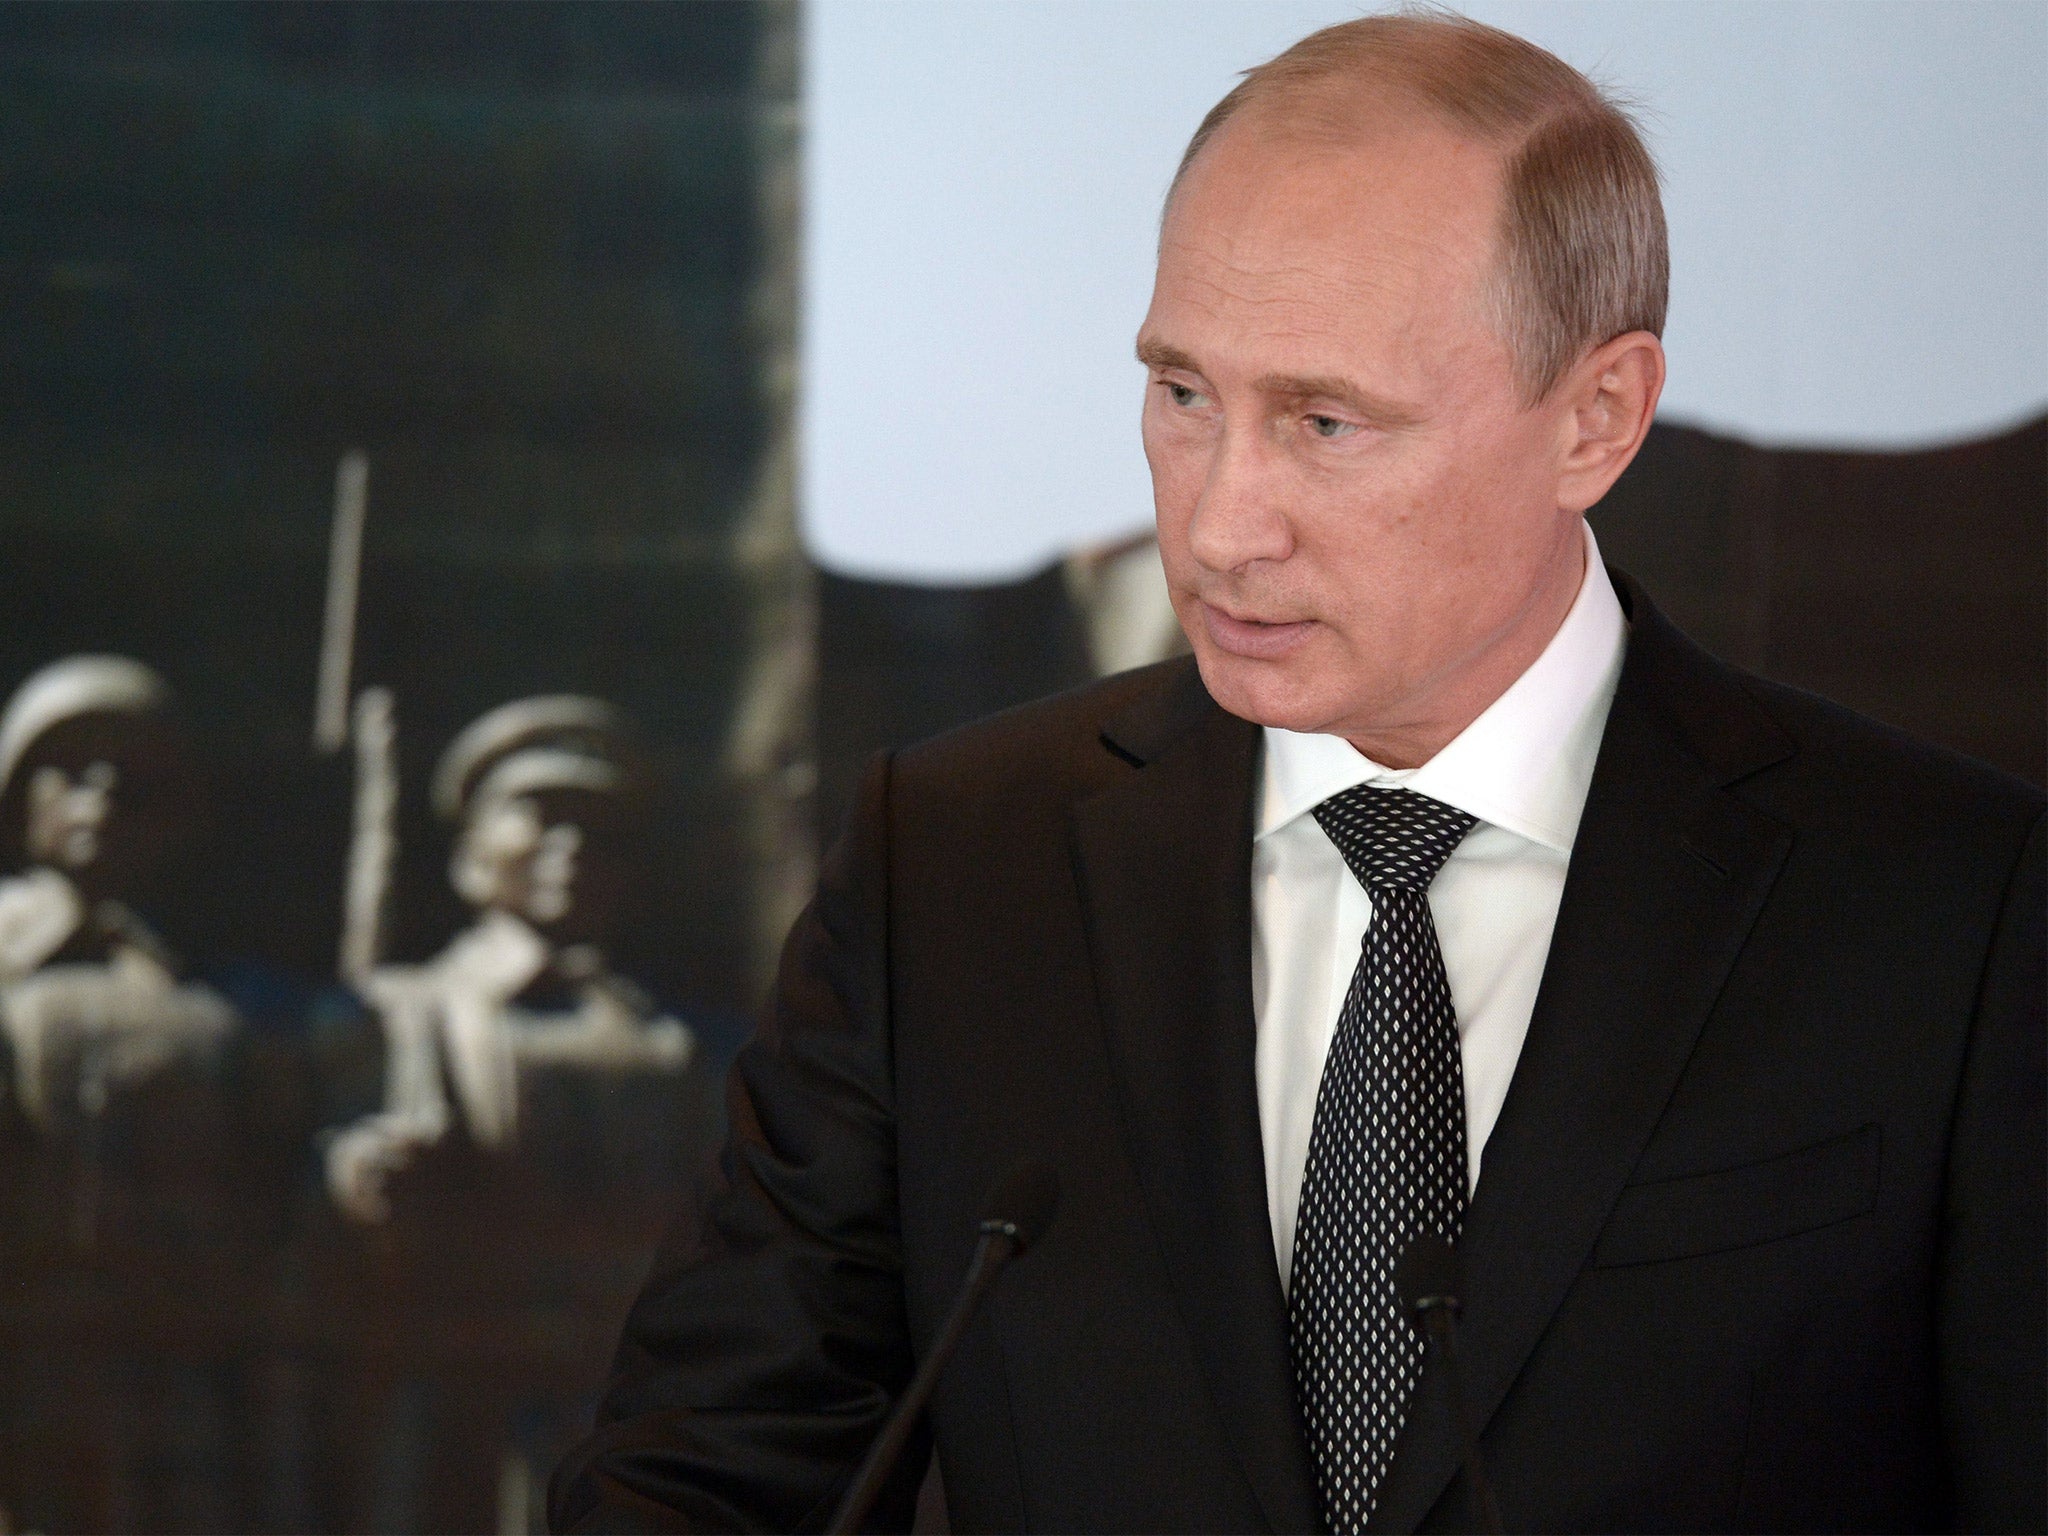 Putin faces domestic pressure to both scale down and ramp up the conflict